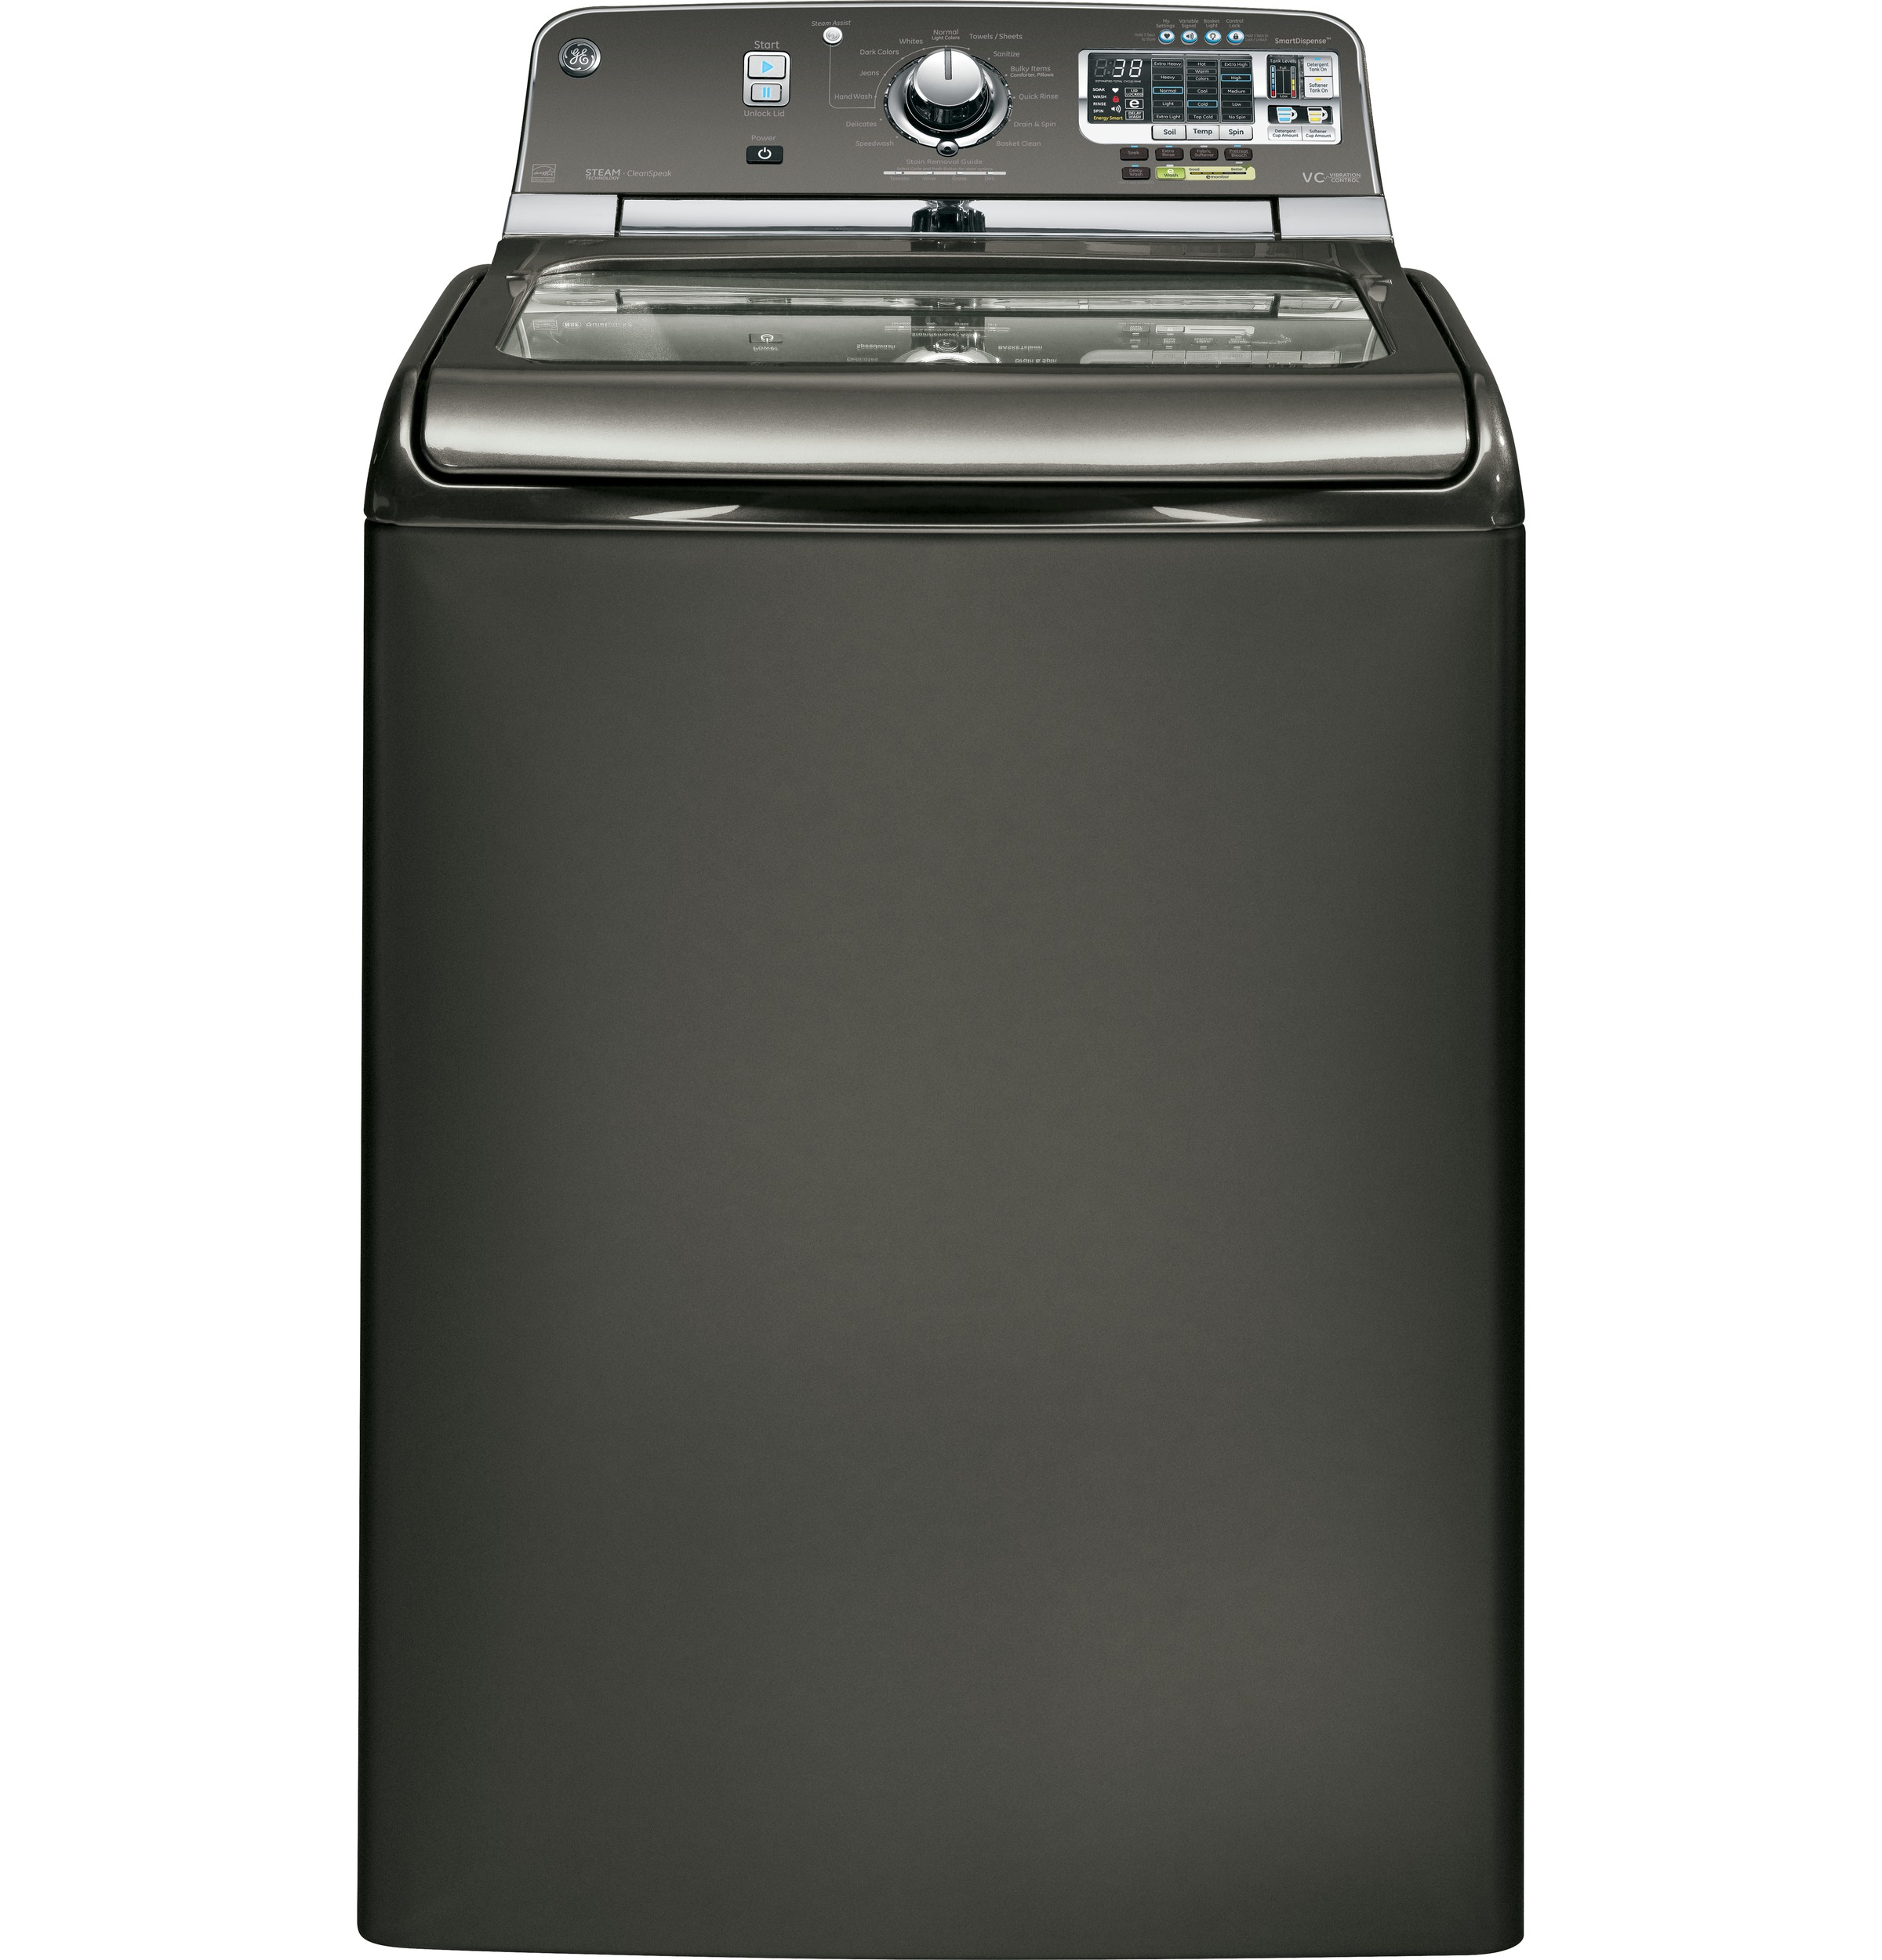 GE® 5.0 DOE cu. ft. capacity washer with stainless steel basket and steam